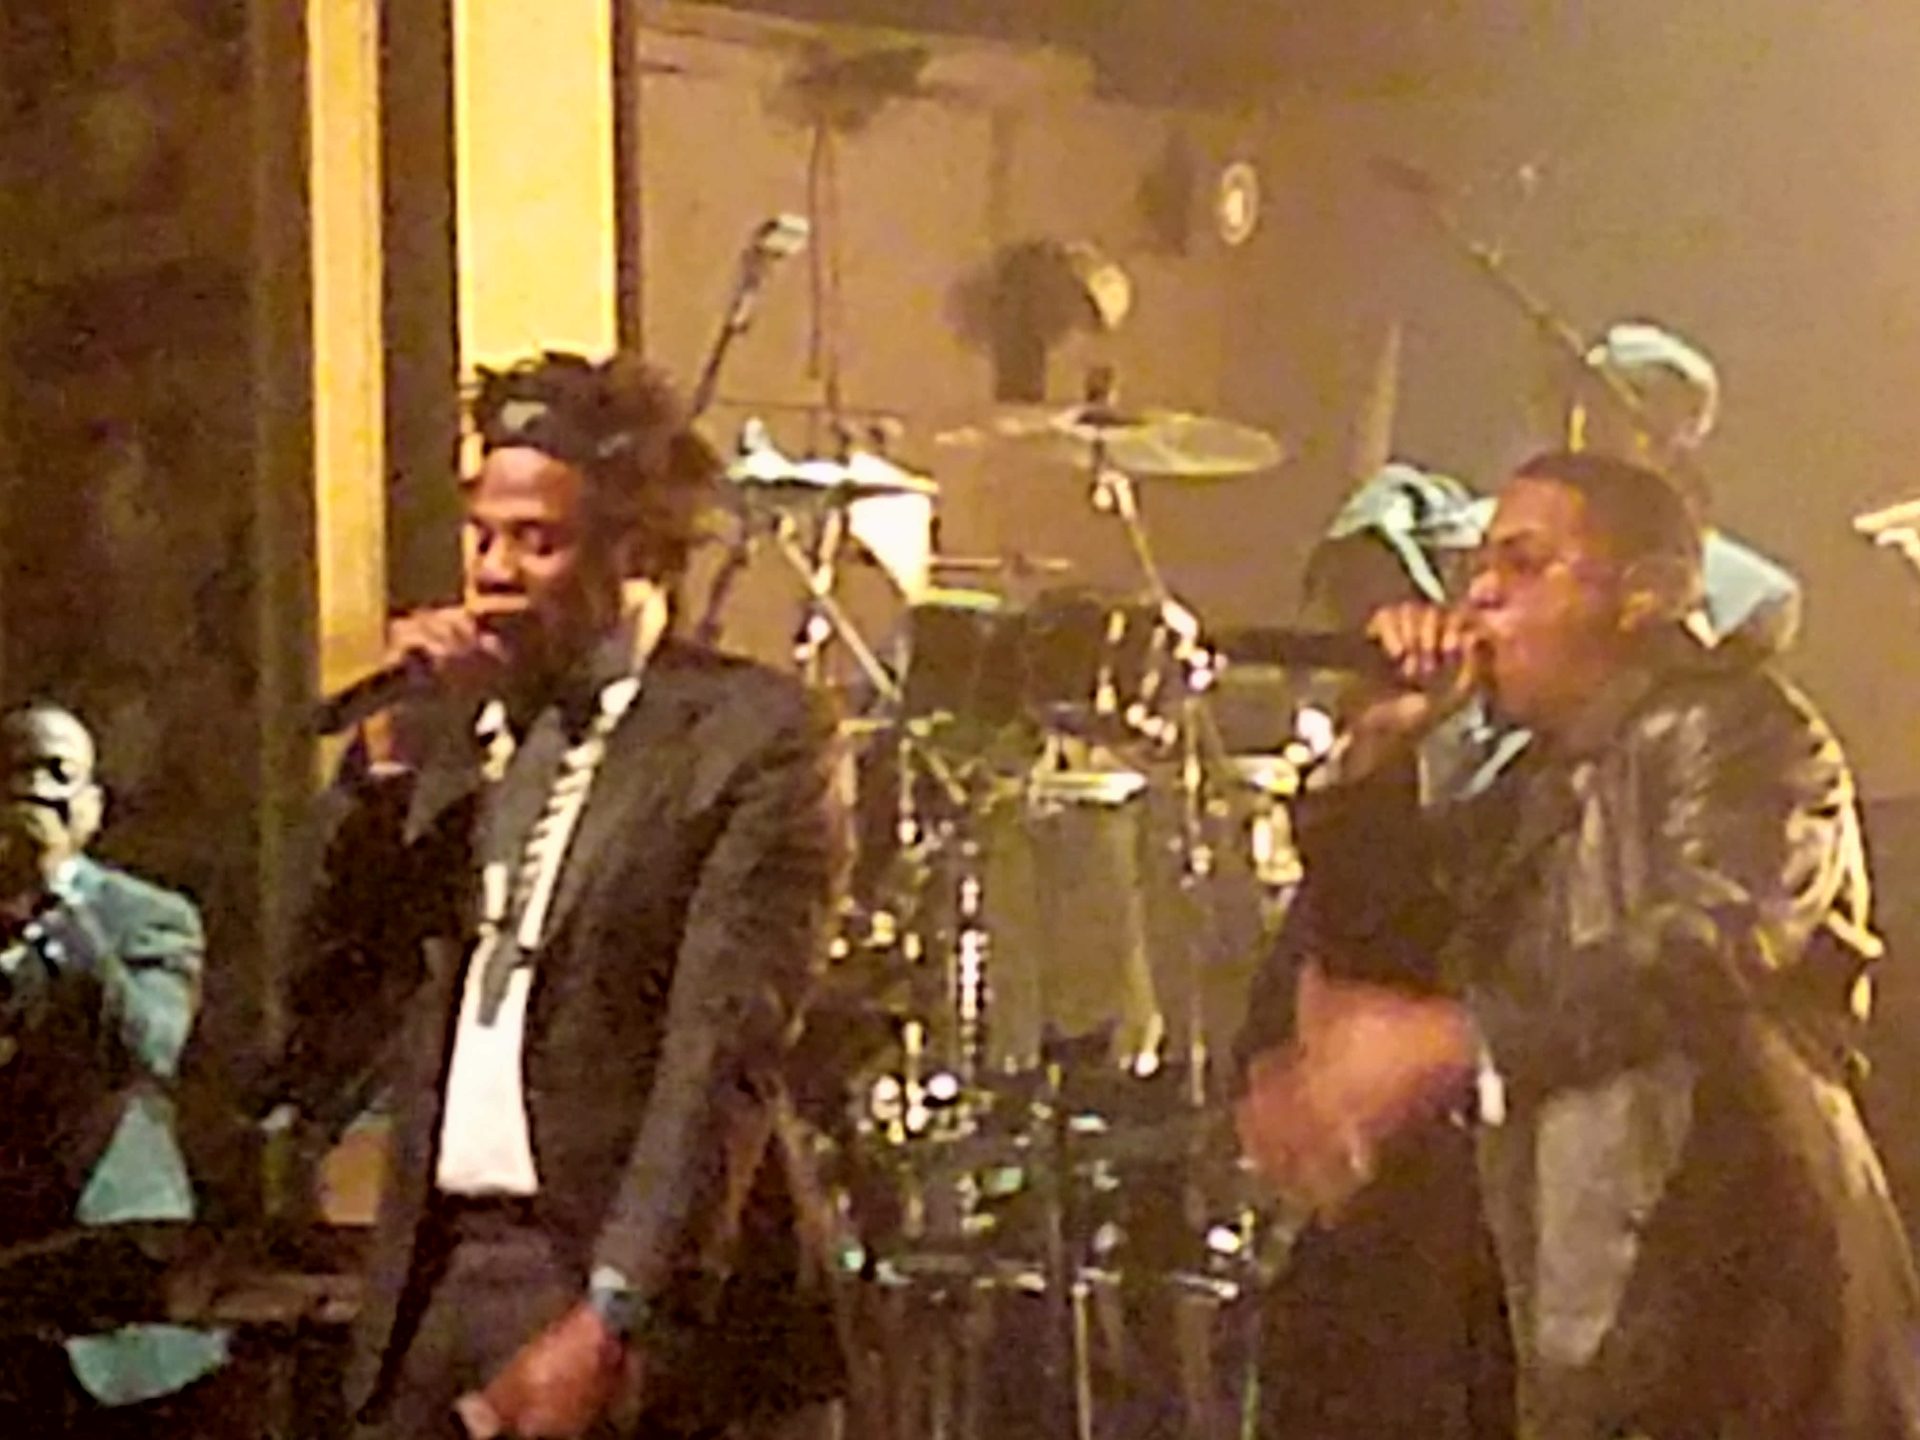 Jay-Z performs with Nas at Webster Hall grand re-opening (Photo by Derrel Jazz Johnson of Steed Media Service)